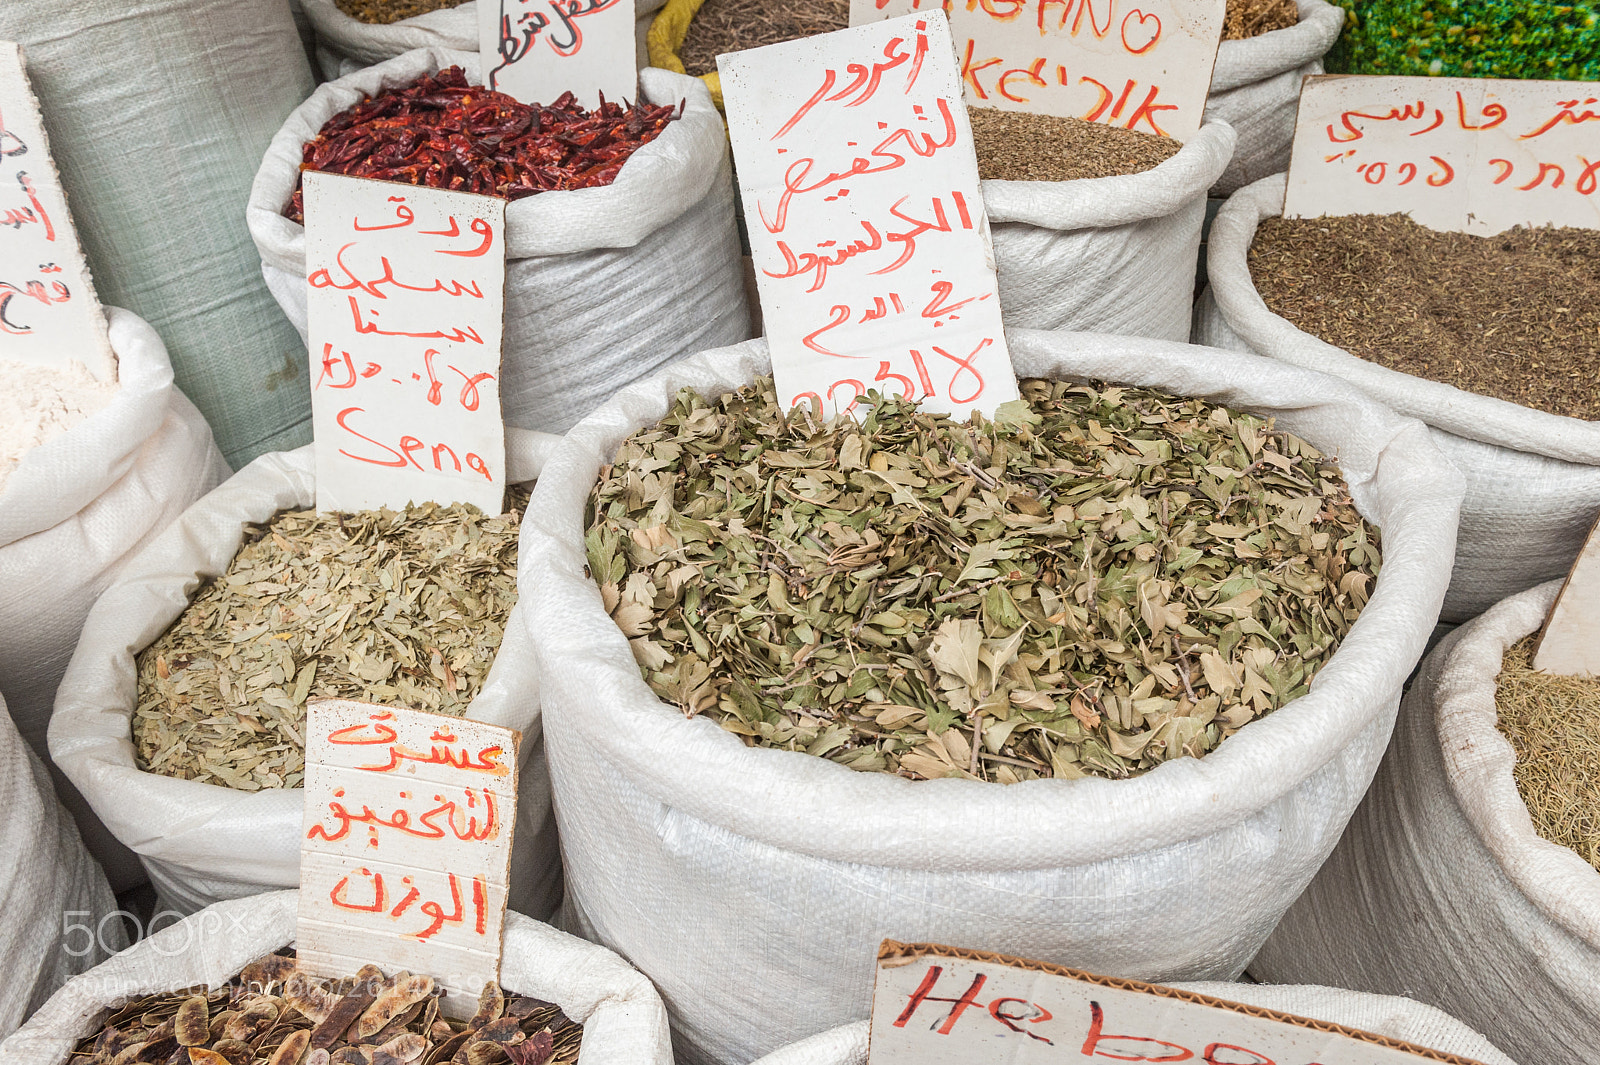 Nikon D700 sample photo. Herbs, spices and dried photography